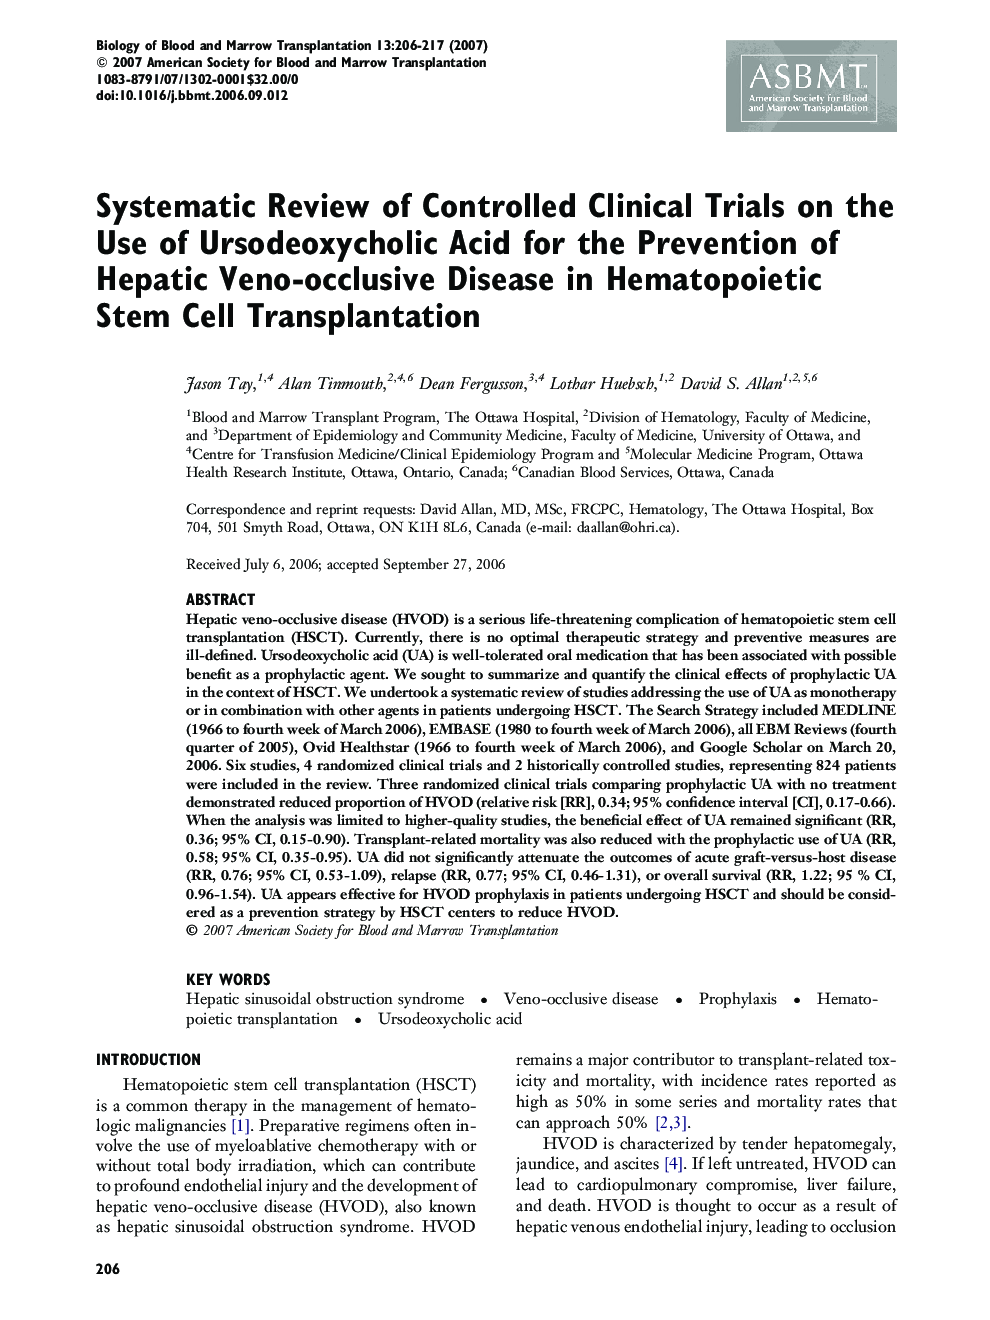 Systematic Review of Controlled Clinical Trials on the Use of Ursodeoxycholic Acid for the Prevention of Hepatic Veno-occlusive Disease in Hematopoietic Stem Cell Transplantation